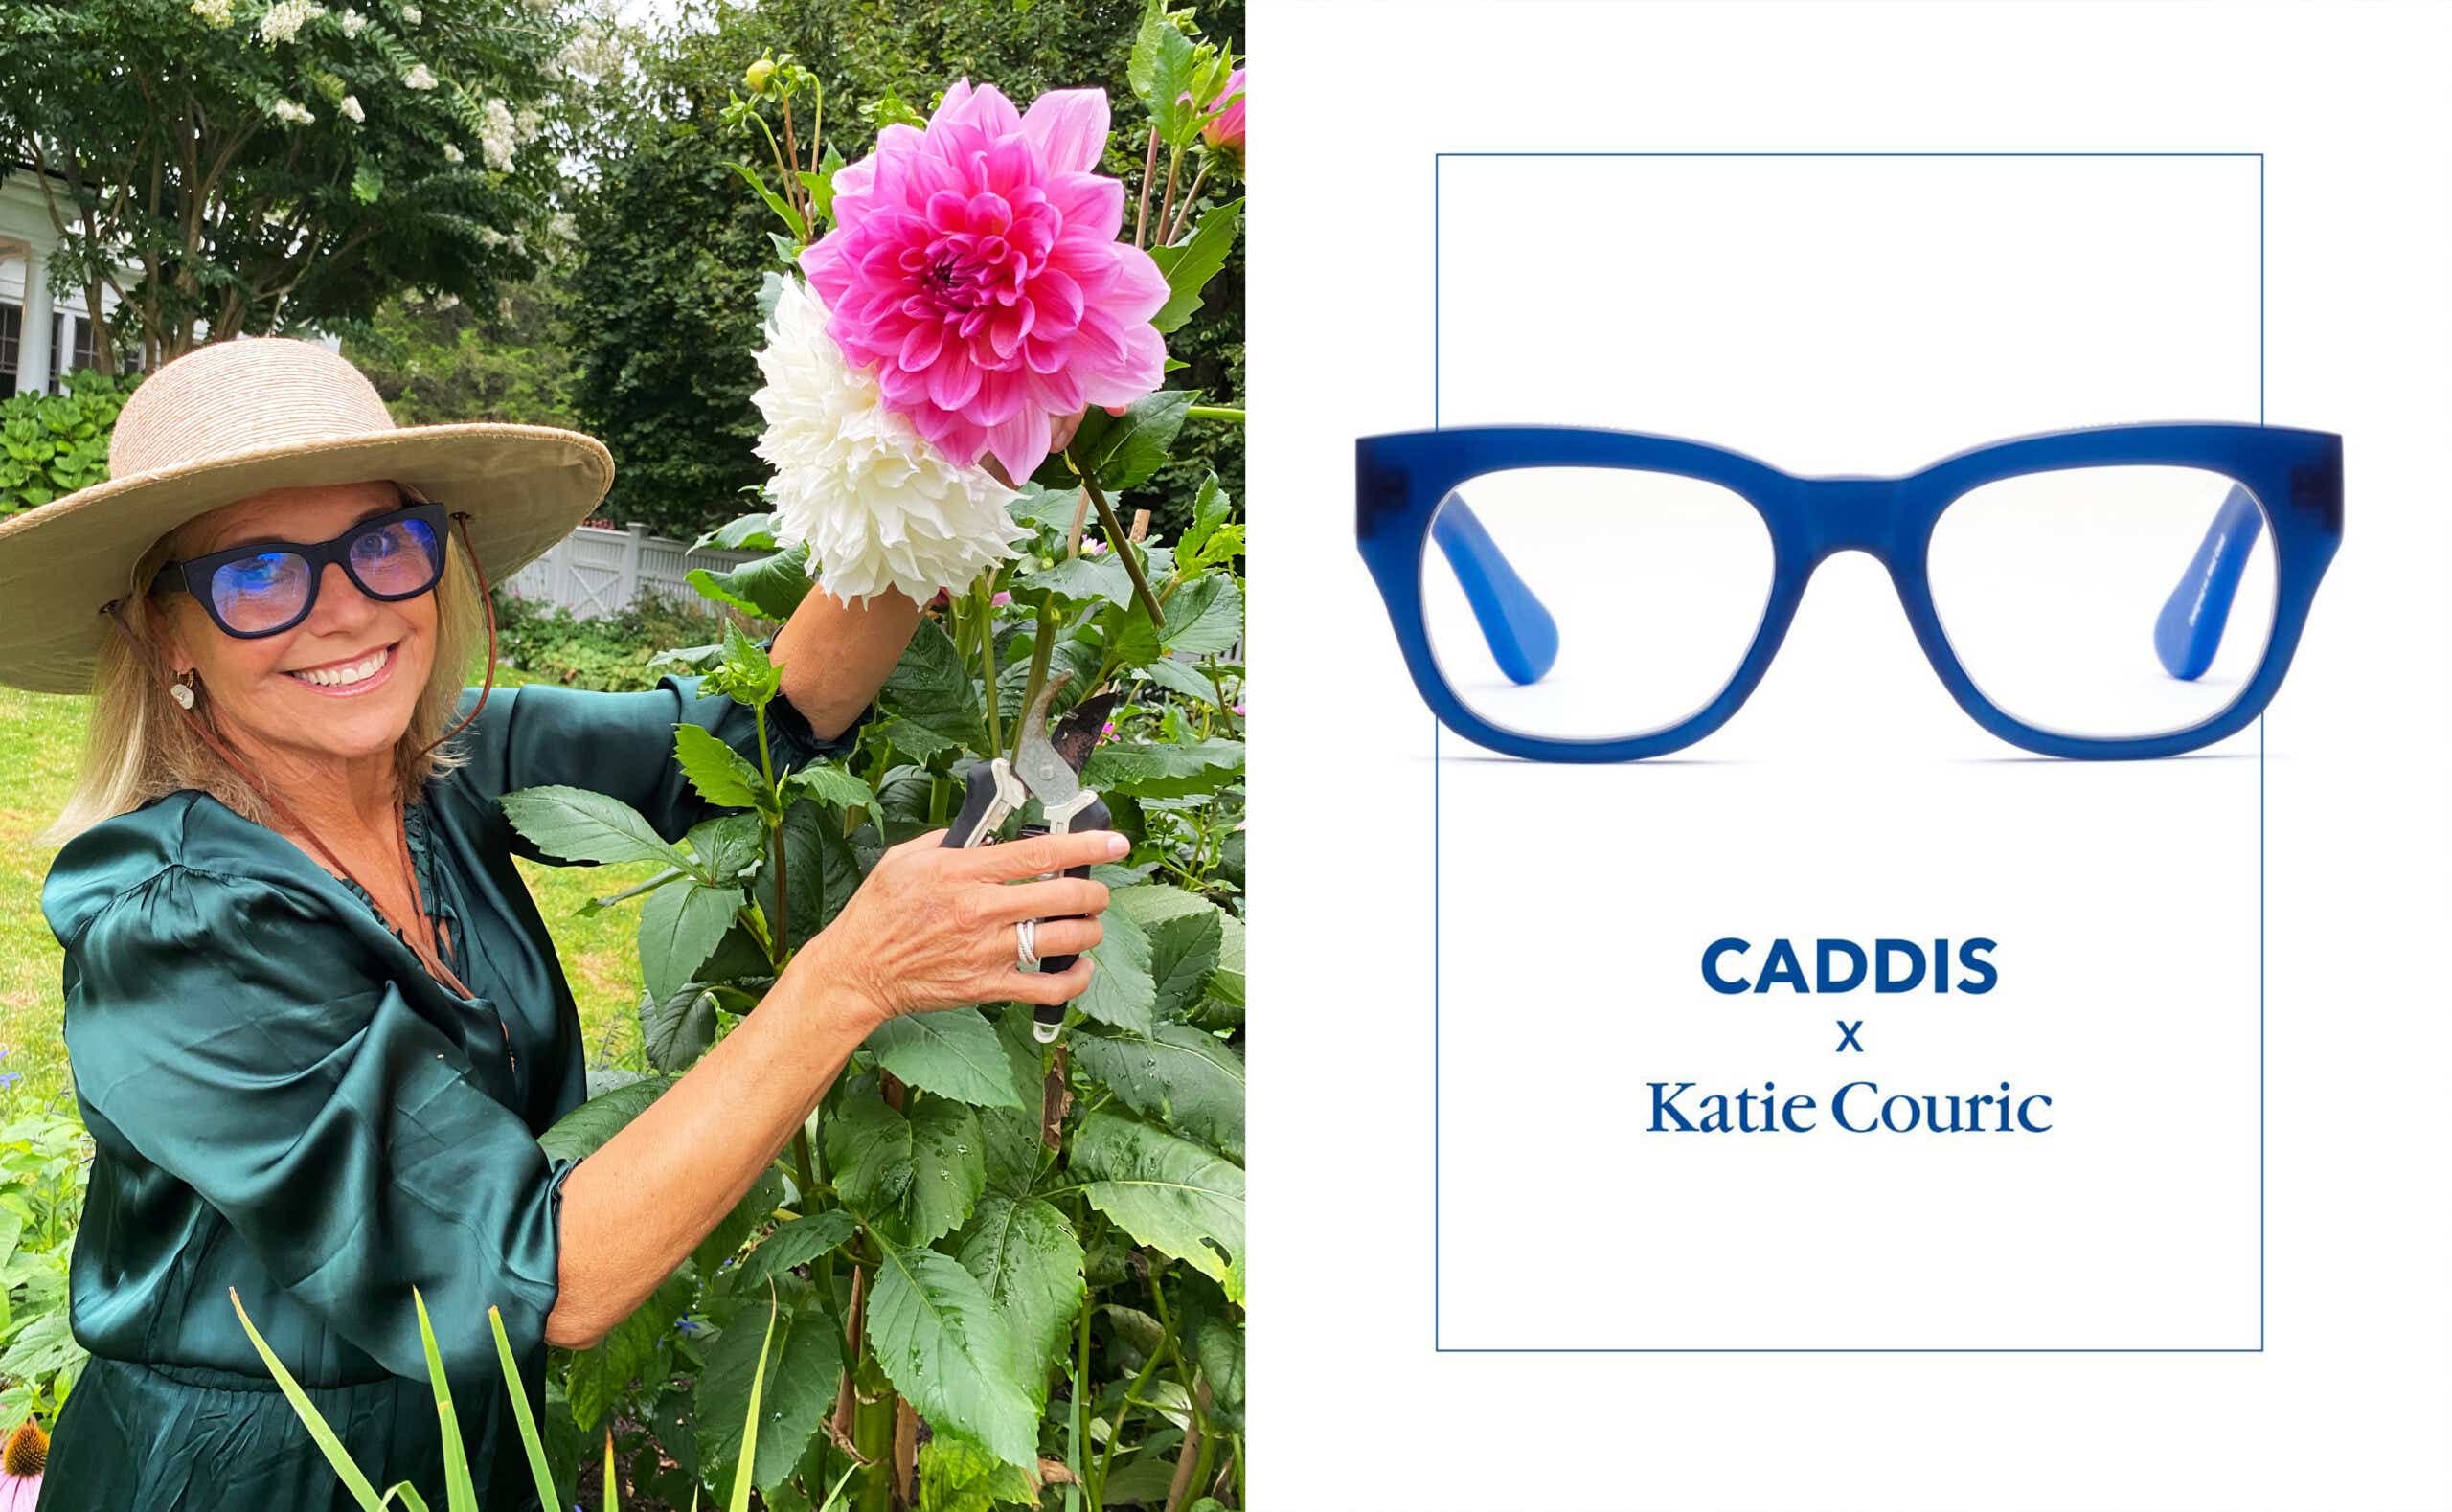 Katie Couric wearing Caddis Glasses while gardening